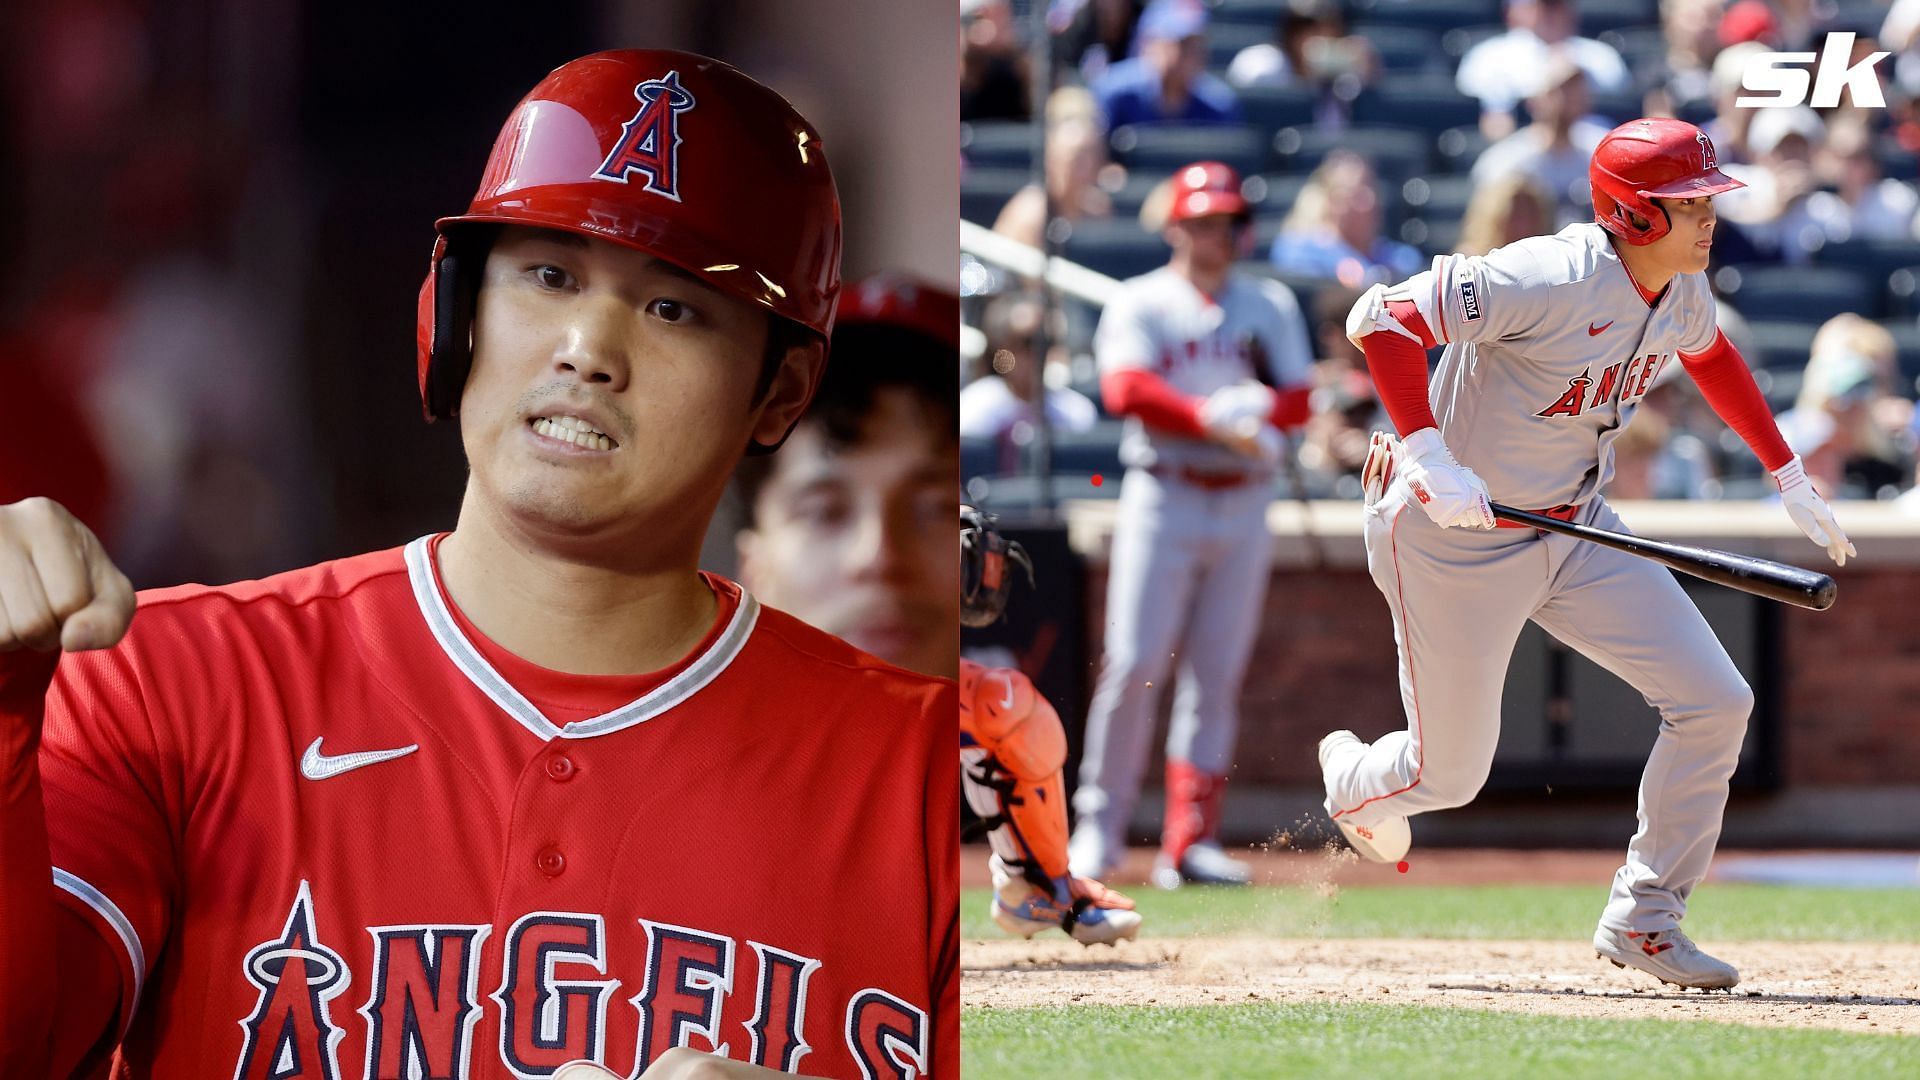 The Cubs have been named as another possible Shohei Ohtani candidate